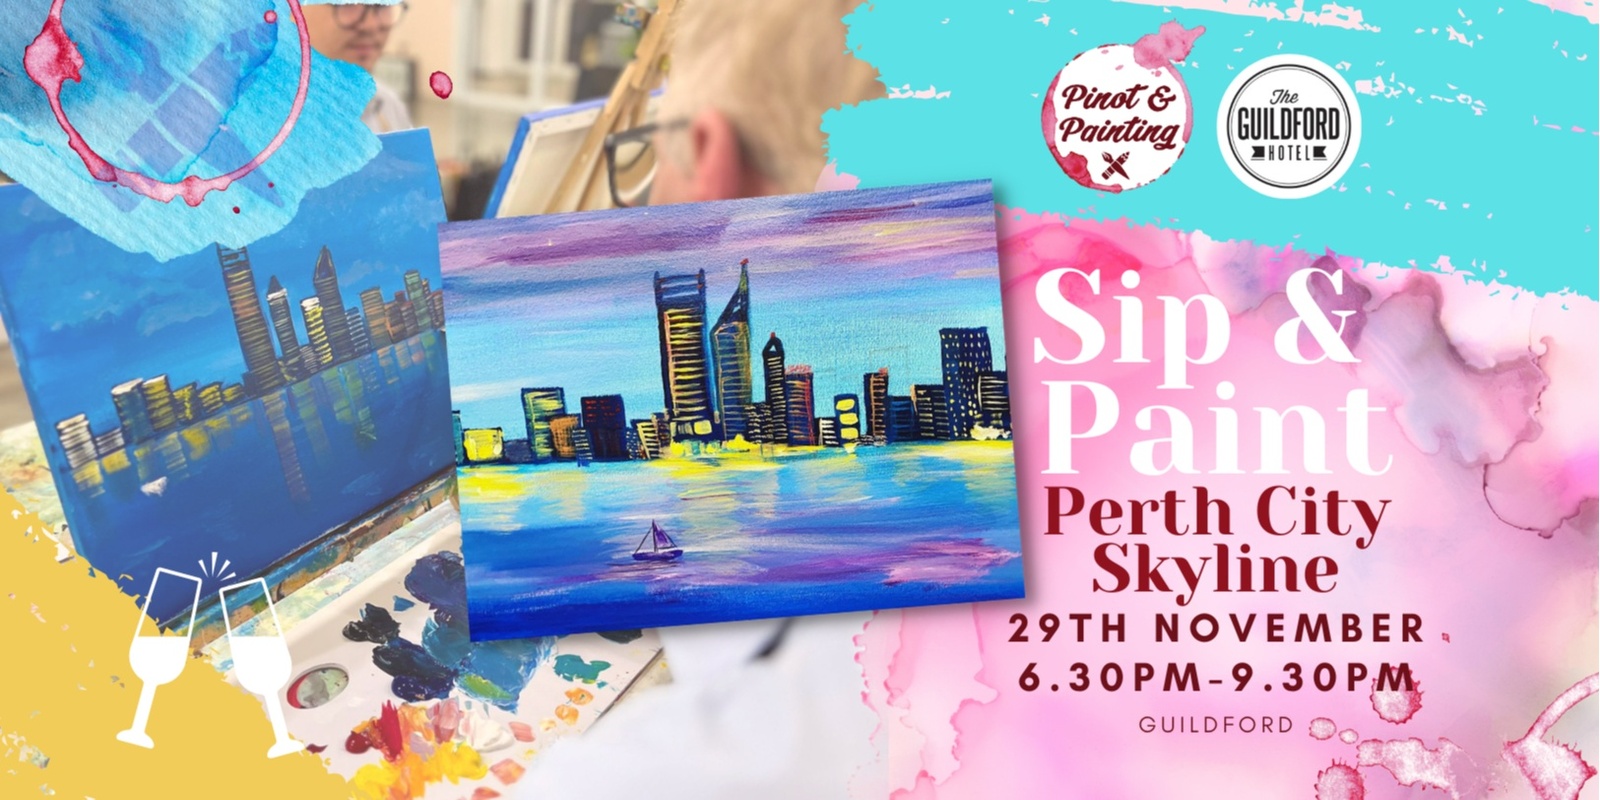 Banner image for Perth City Skyline - Sip & Paint @ The Guildford Hotel